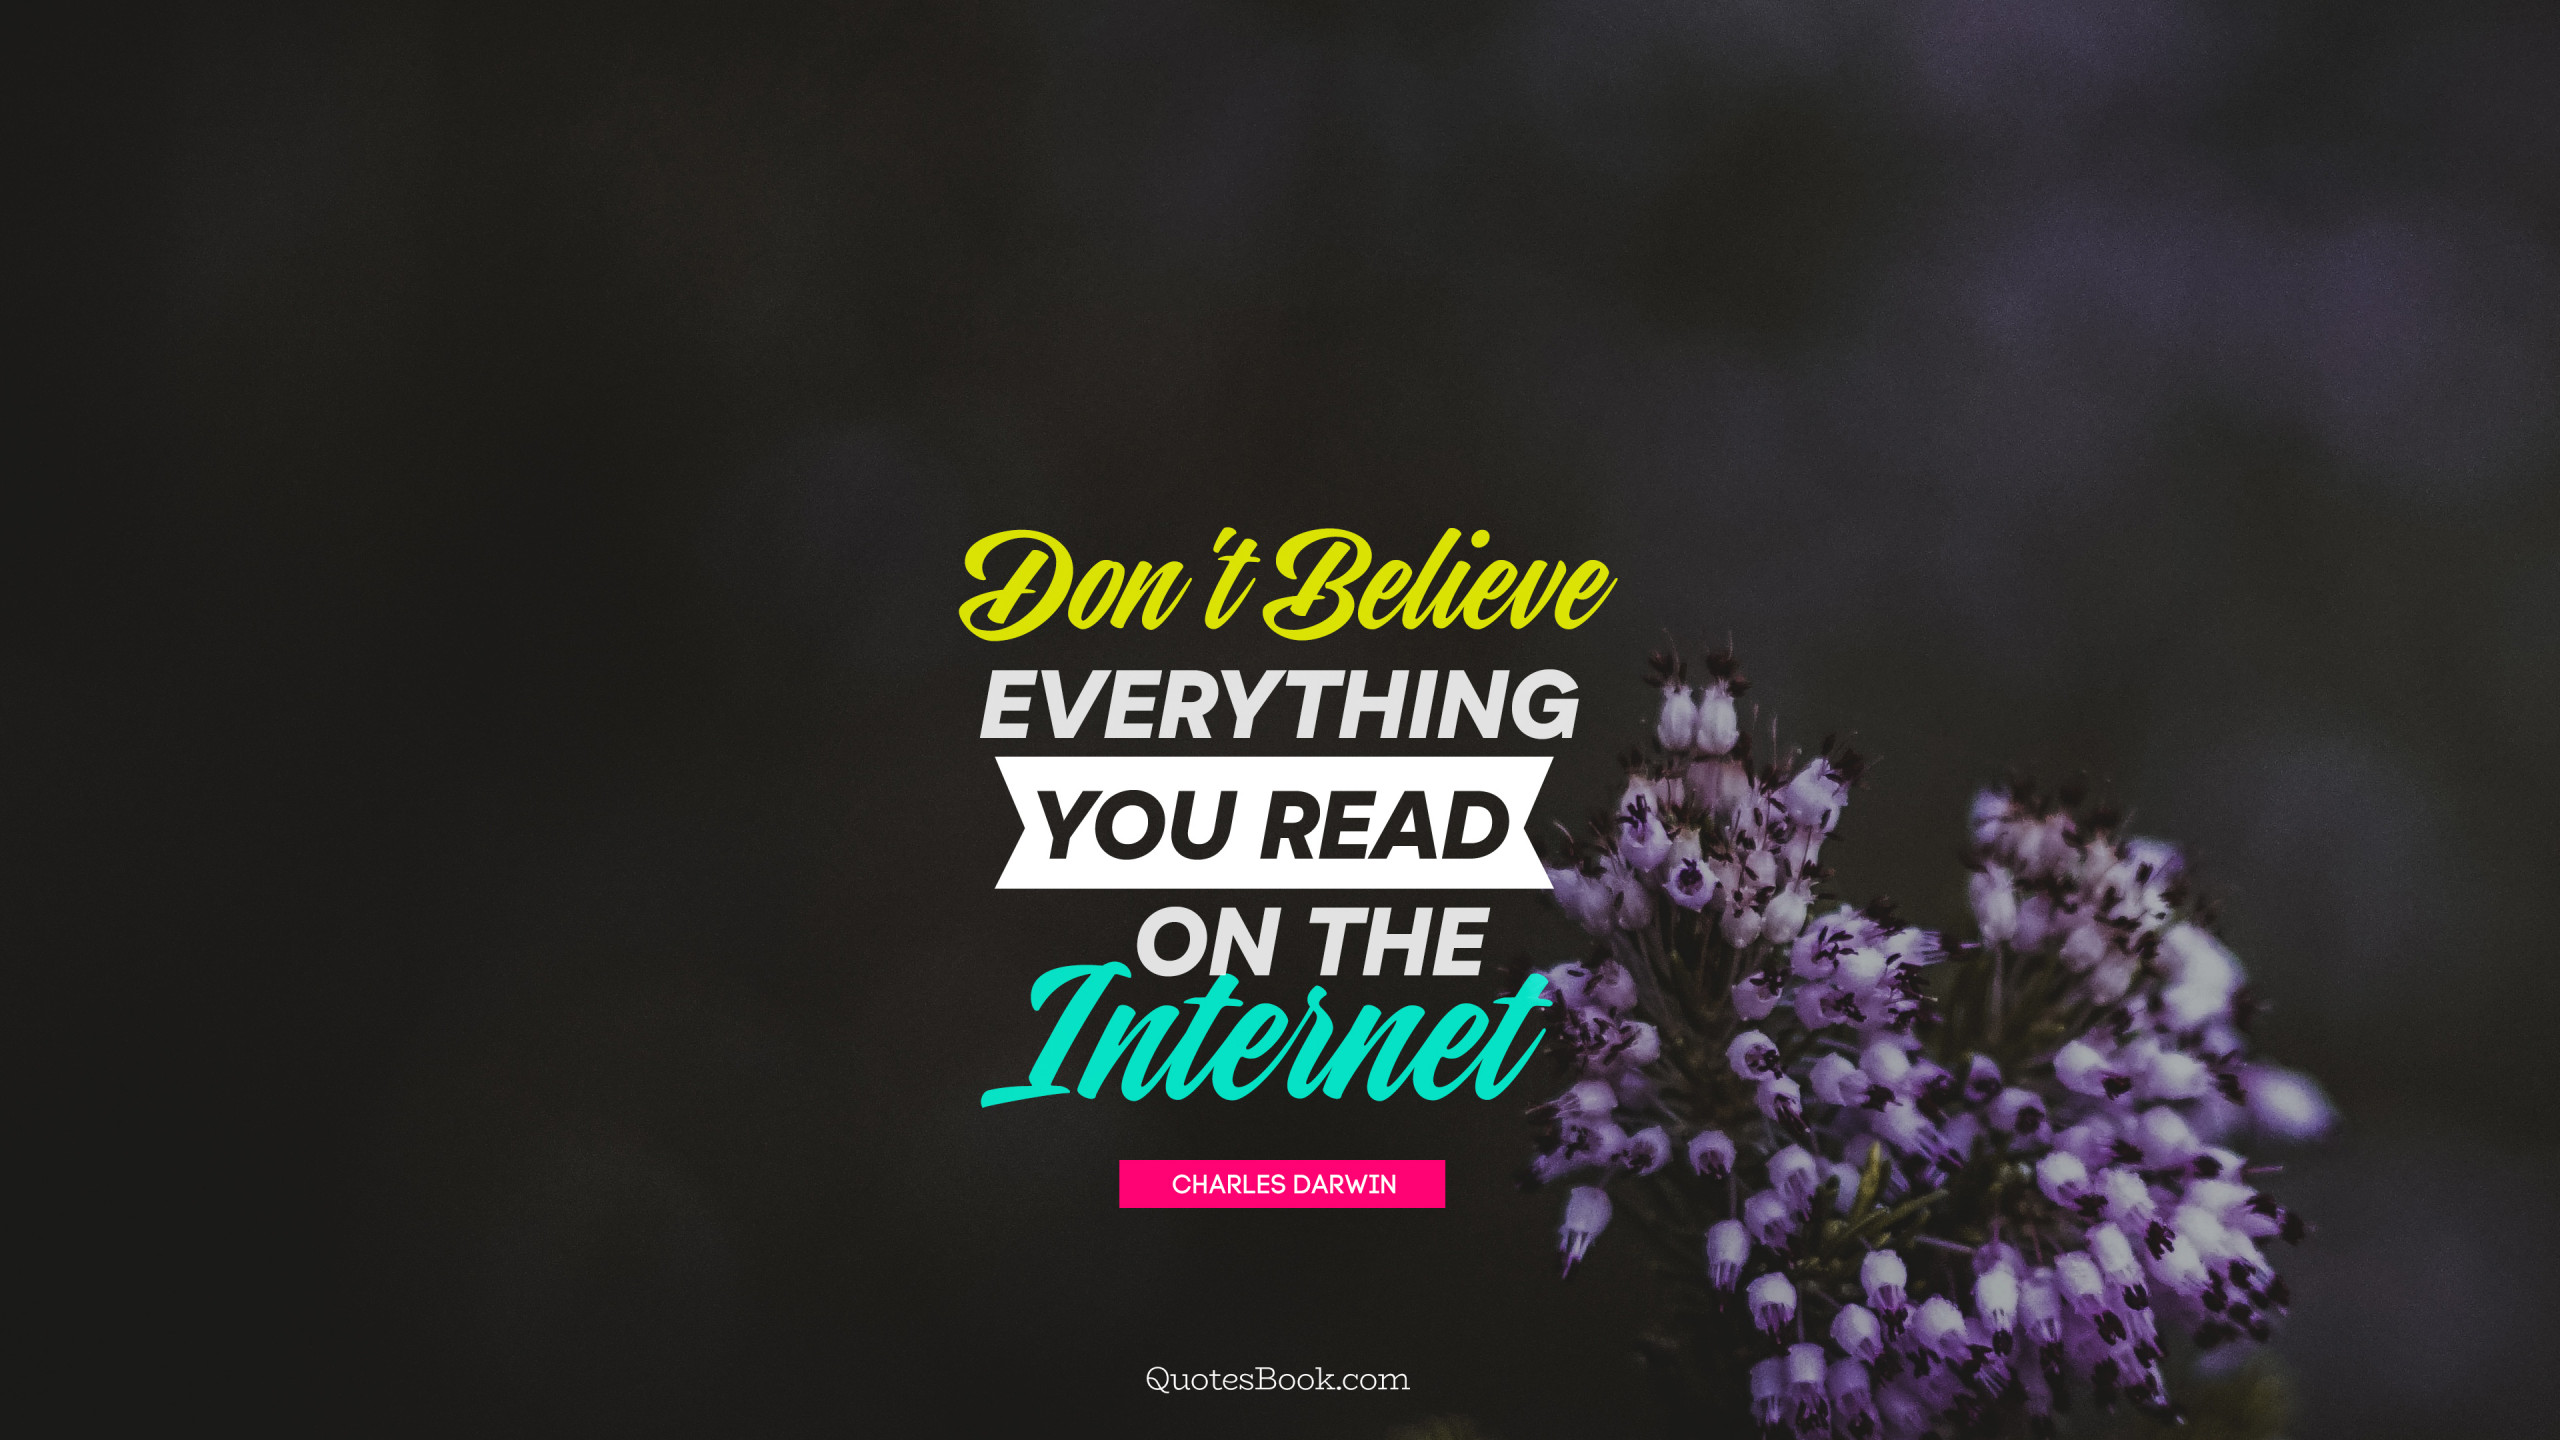 Don't believe everything you read on the internet - QuotesBook